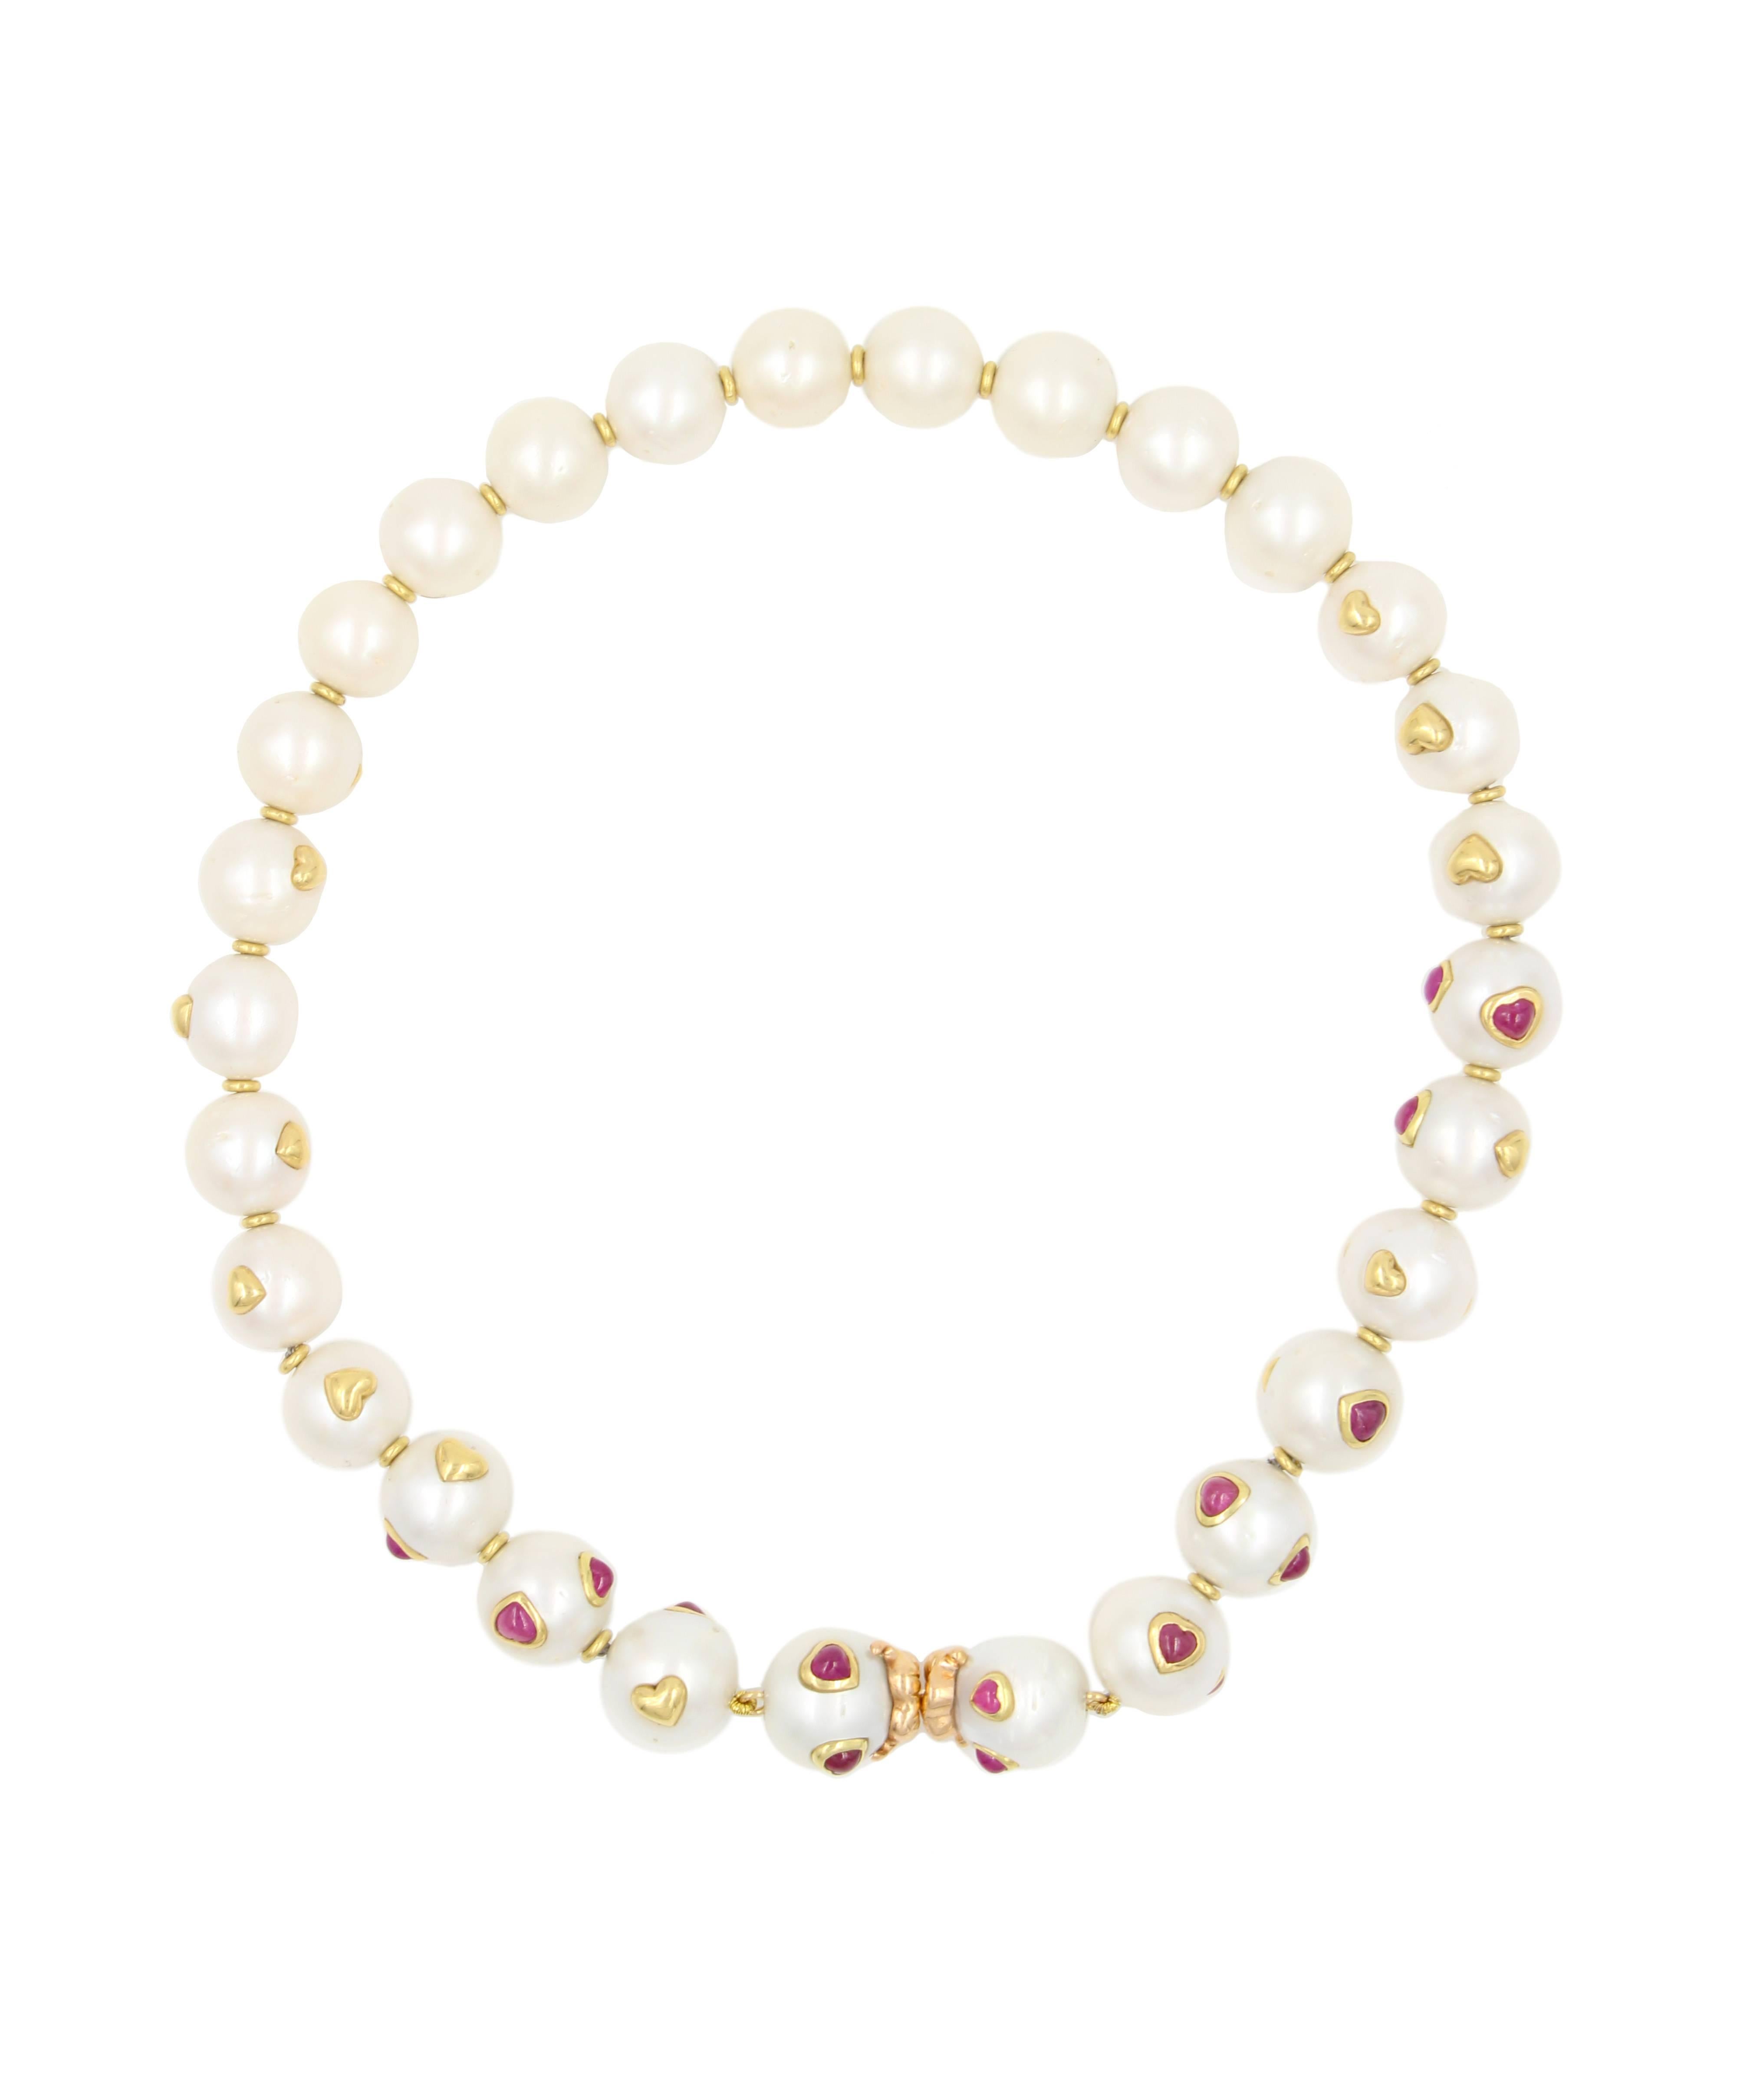 The Be My Valentine Necklace is a lustrous strand of pearls that feature heart shaped Ruby cabochons set in the South Sea Pearls in 18 karat gold bezels. The clasp is actually lips carved out of gold so when it is clasped the two sweethearts are